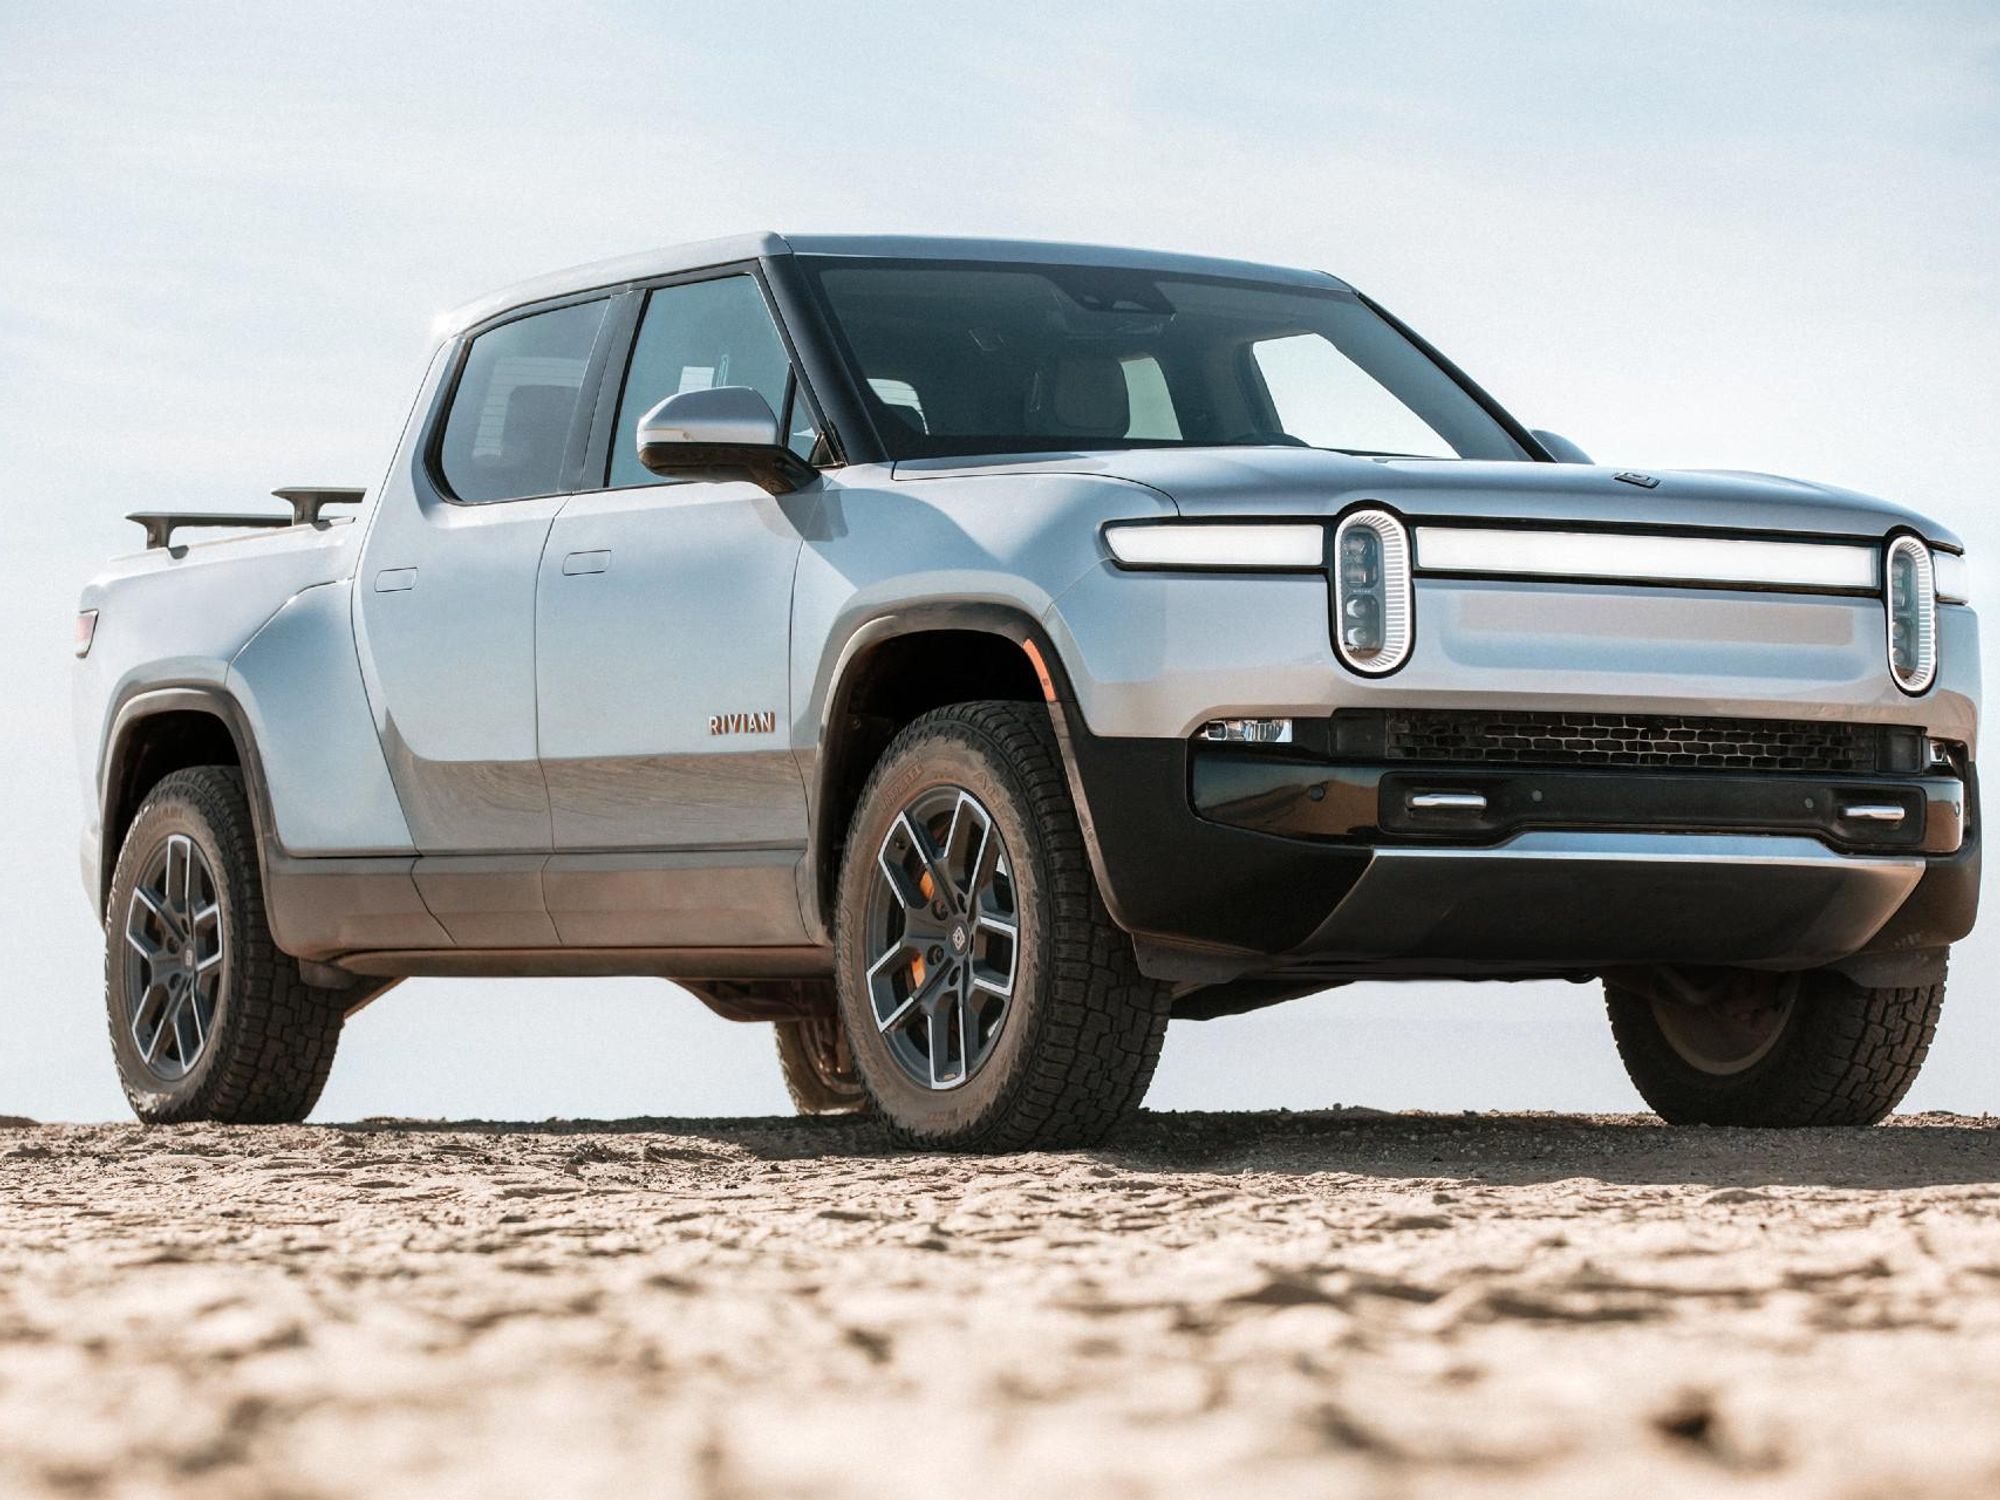 Congrats to Pre-Orders Who Secured Their Prices - All About the Rivian Delivery Experience